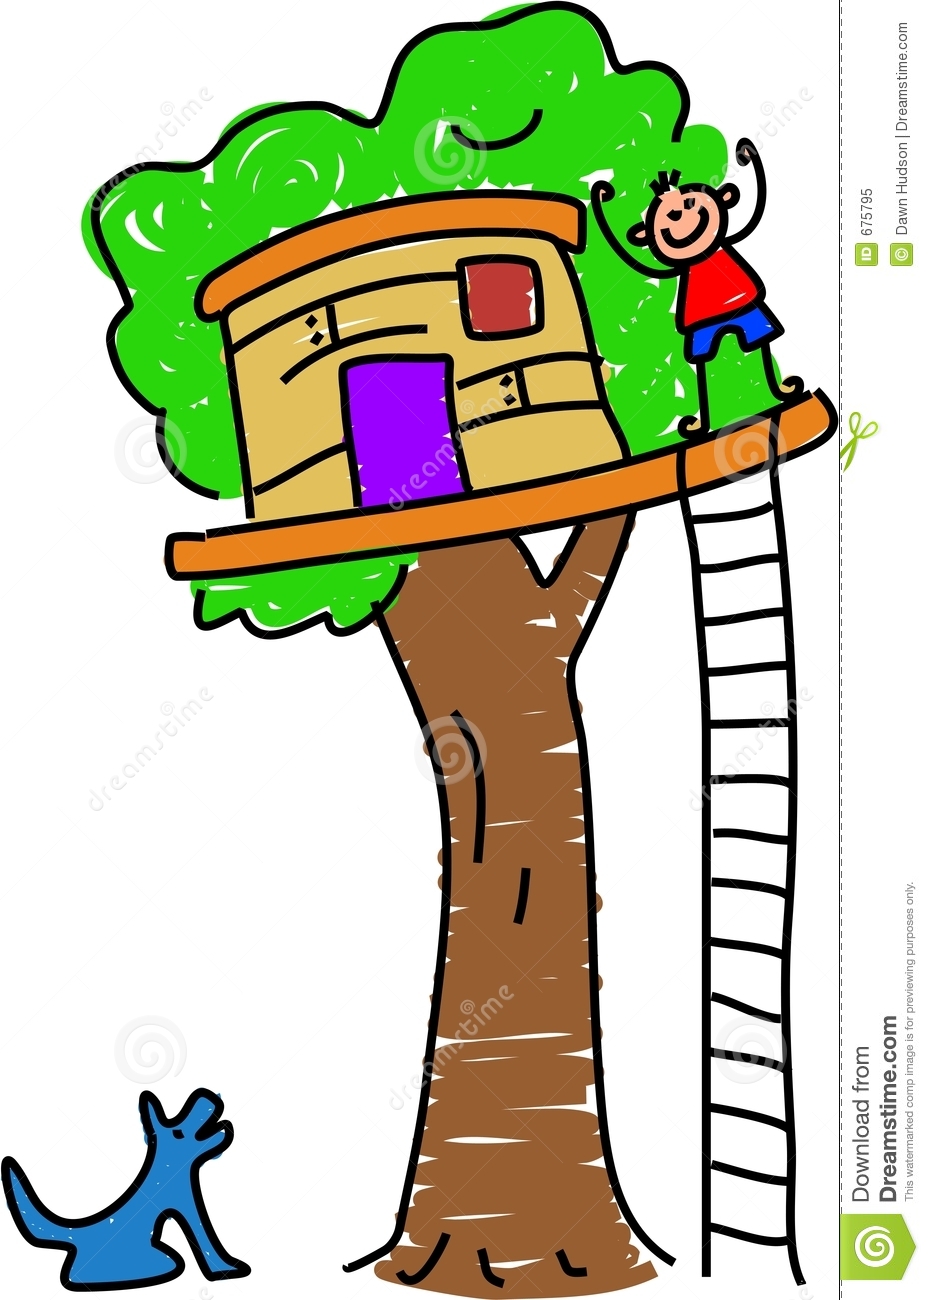 Treetop Clubhouse Clipart.